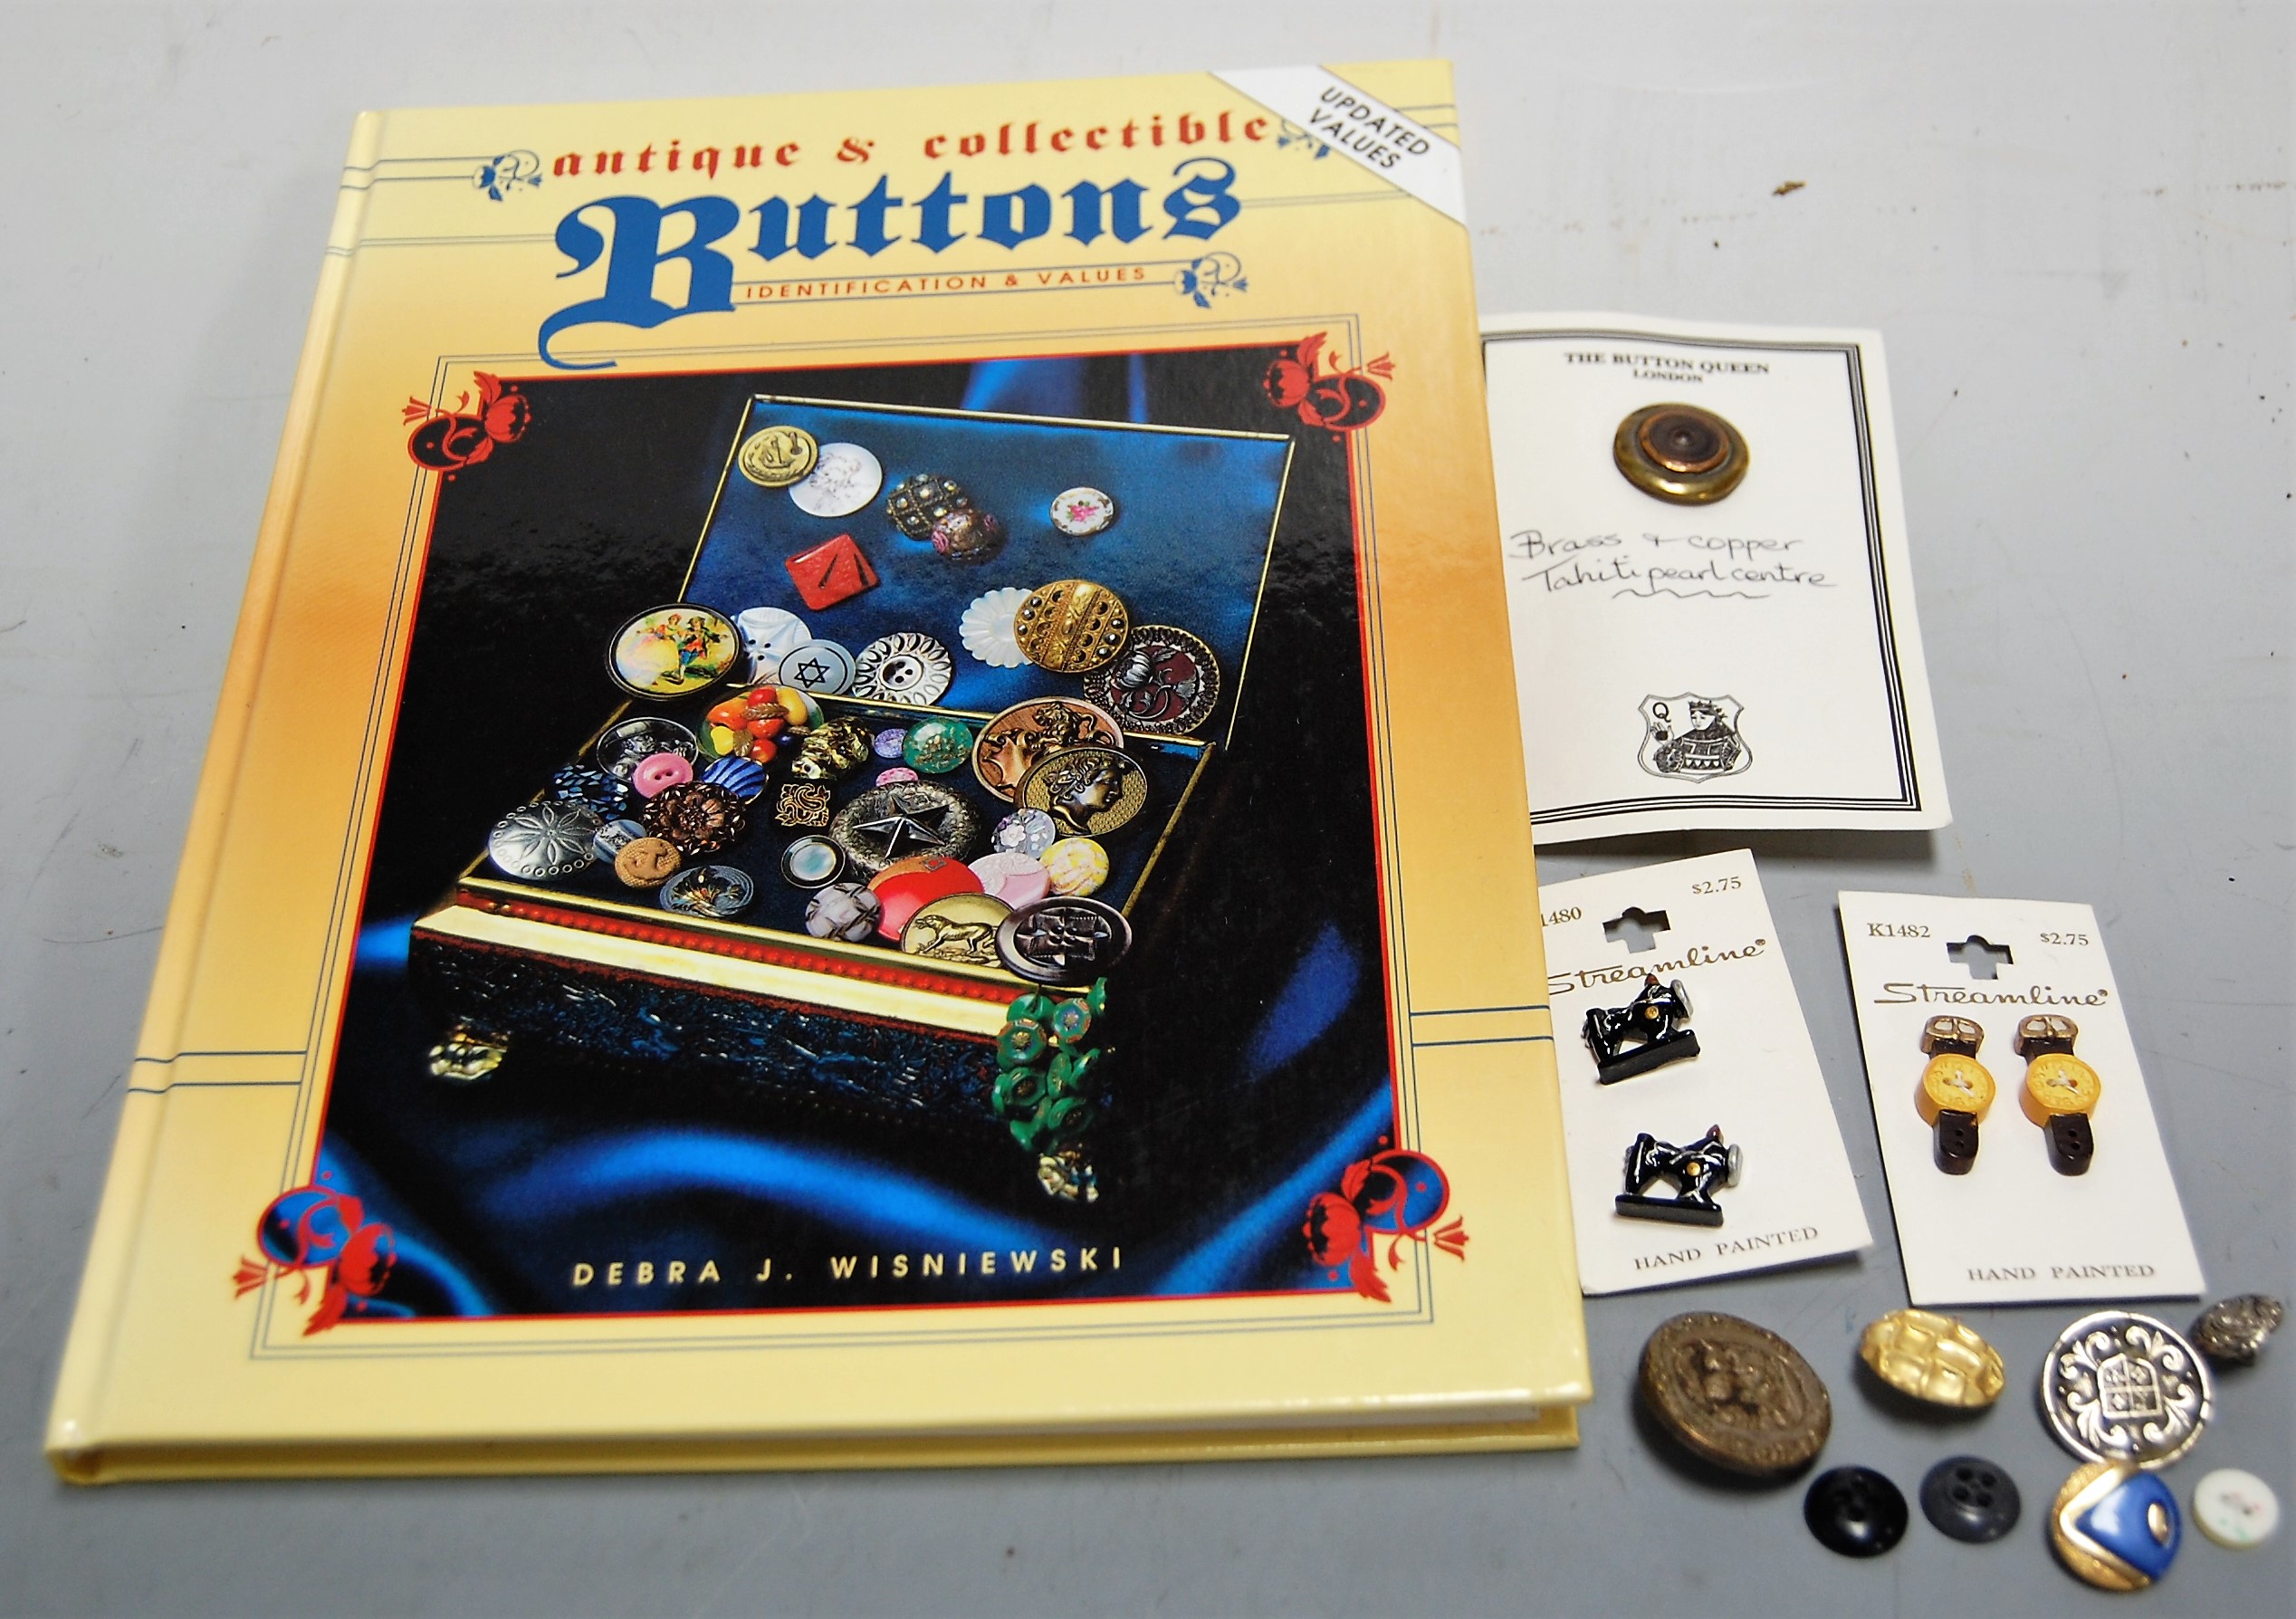 Deborah J. Wisniewski, Antique and Collectable Buttons, Identification and Values, single volume;